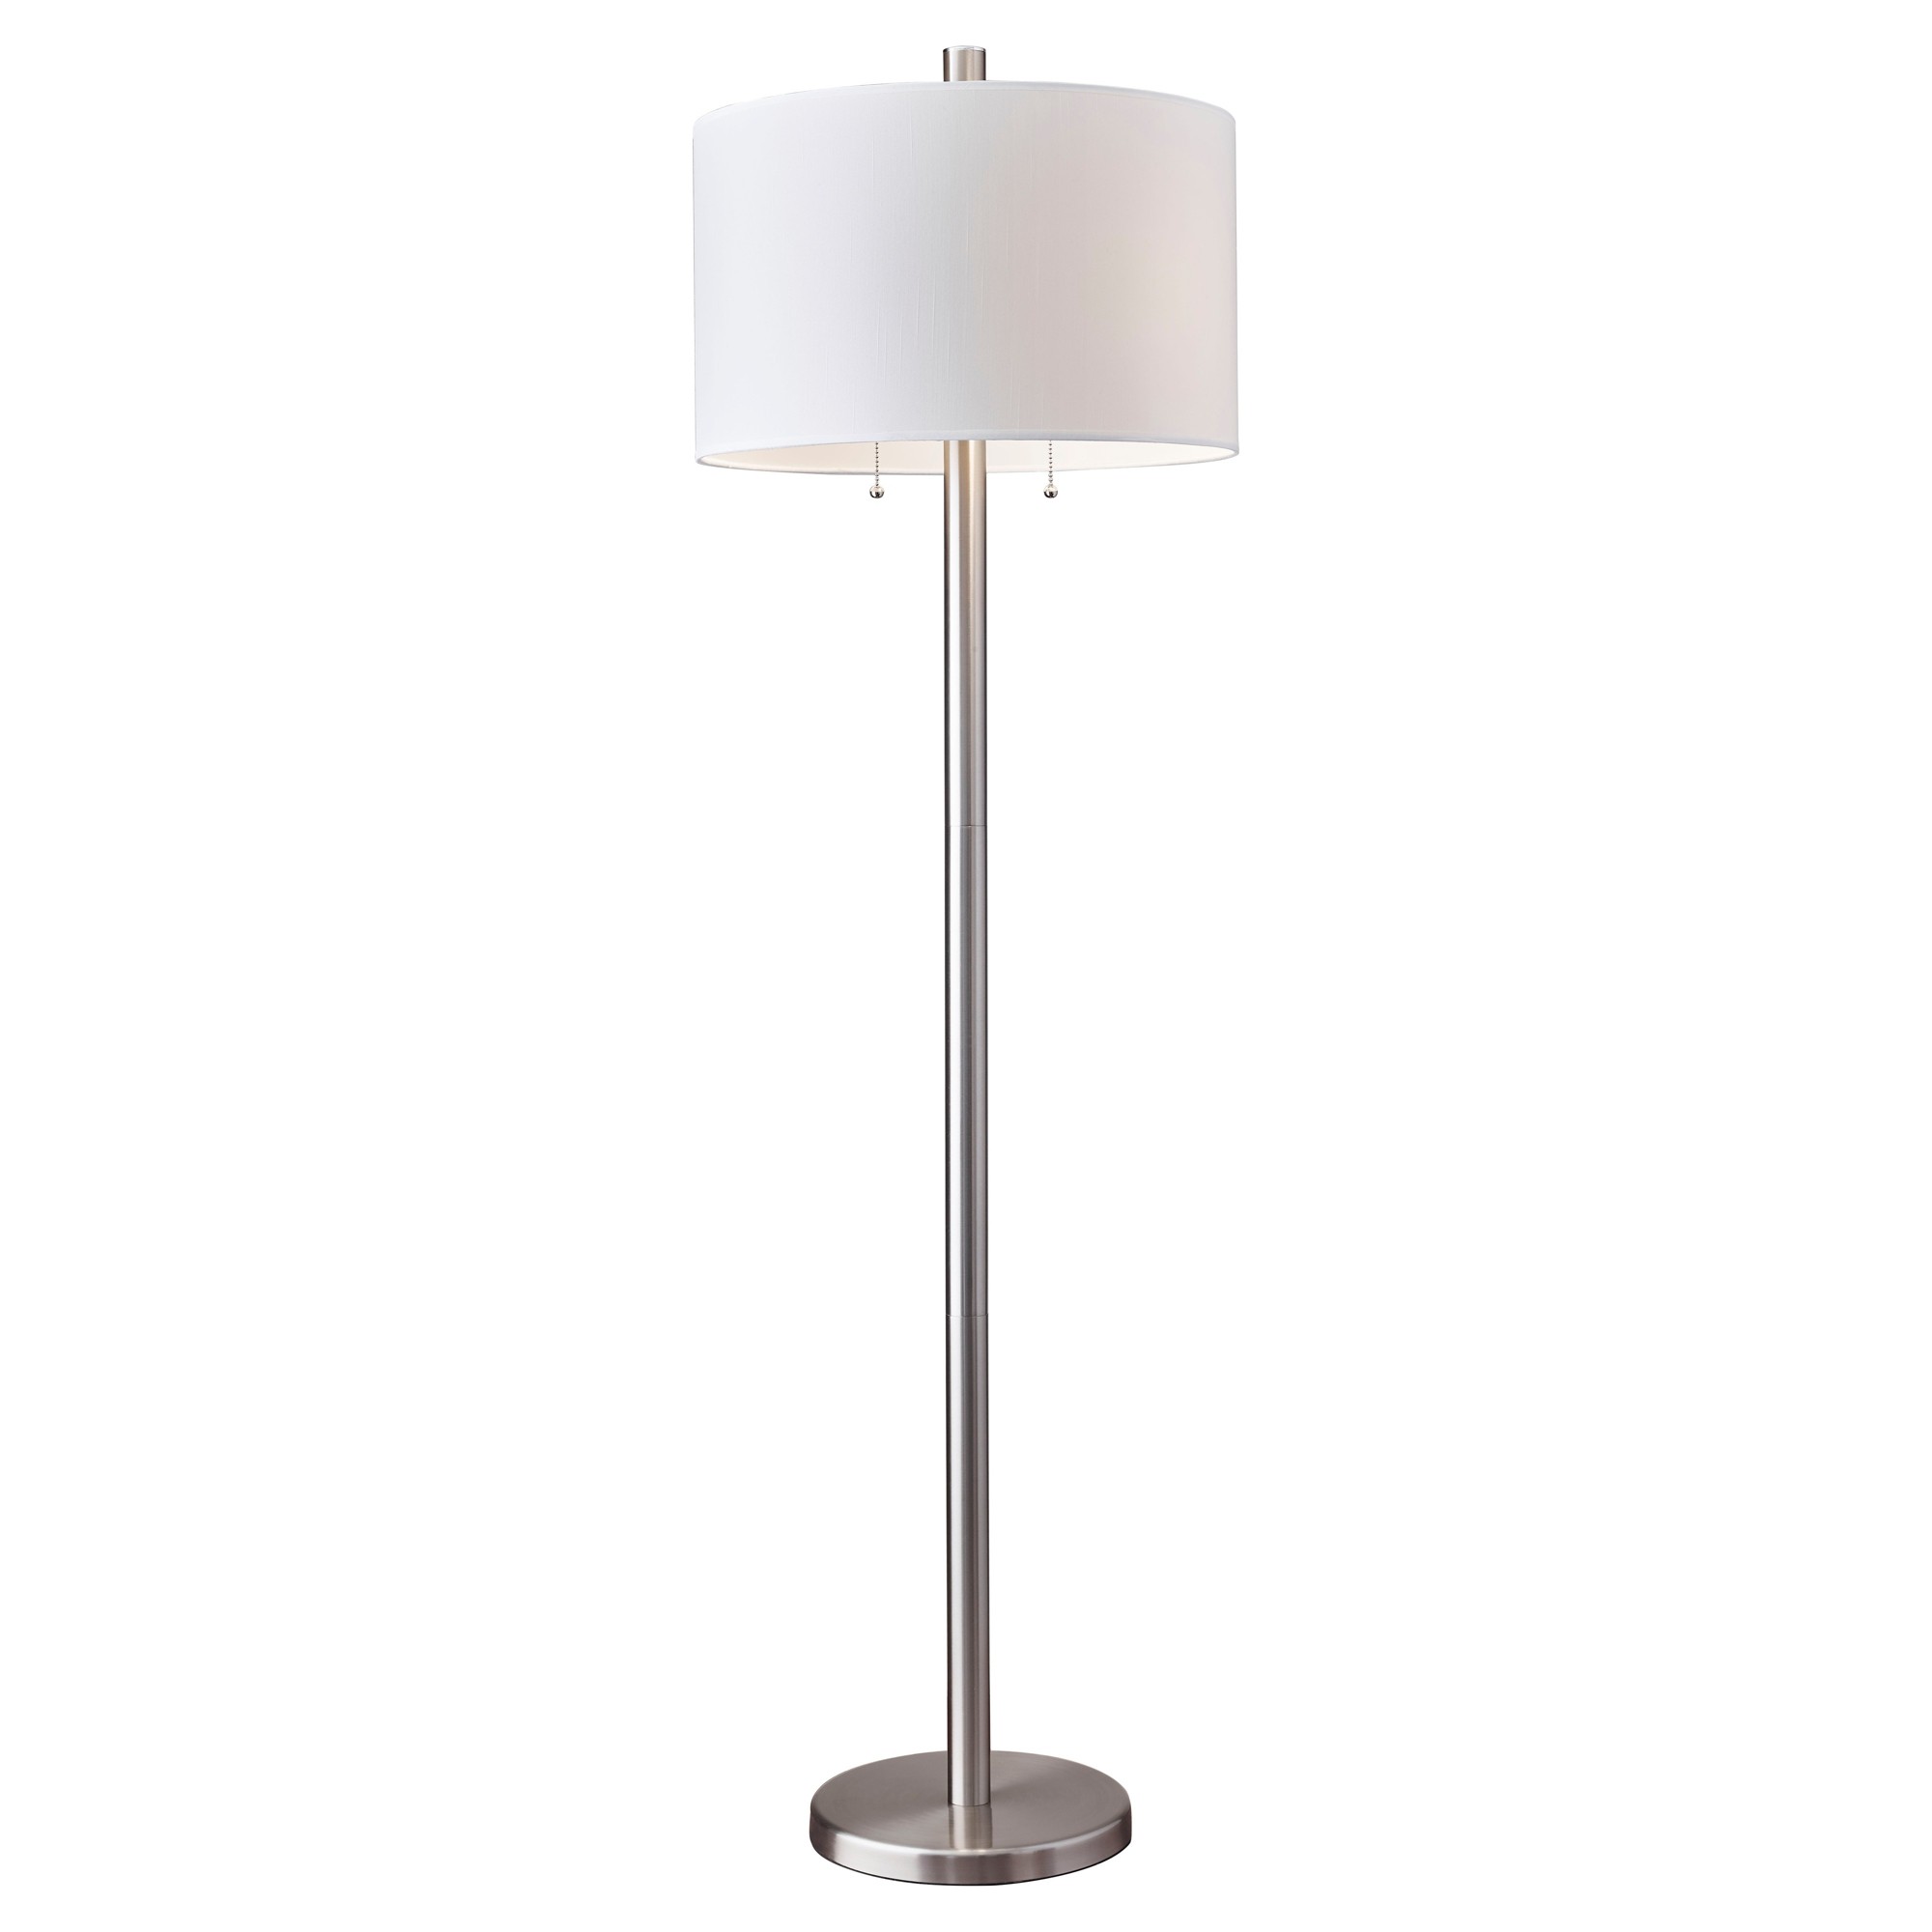 Adesso Boulevard Floor Lamp (Lamp Only) - Silver/White